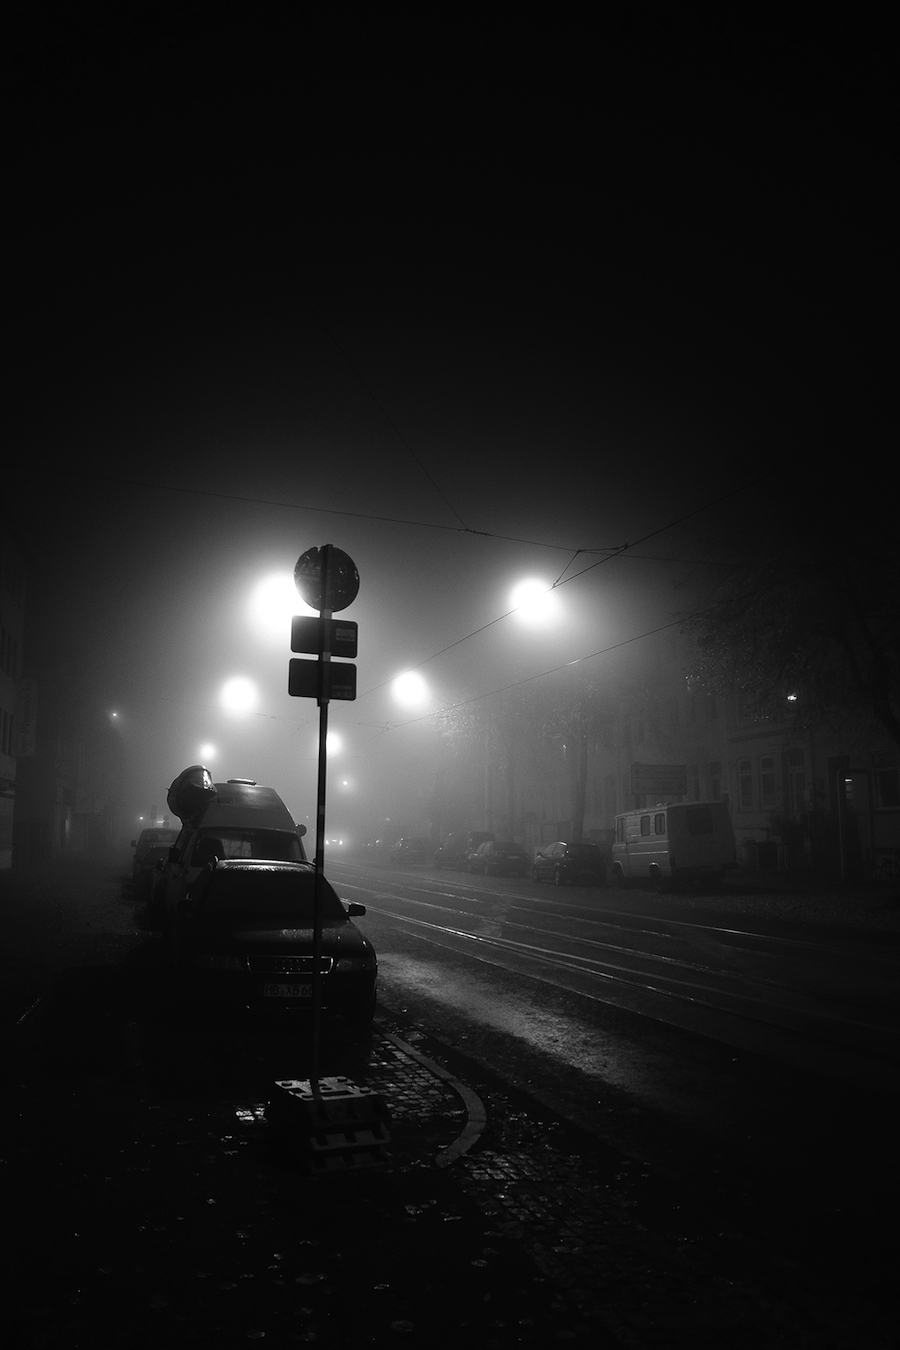 Mysterious Black and White Urban Scenes in the Fog-9